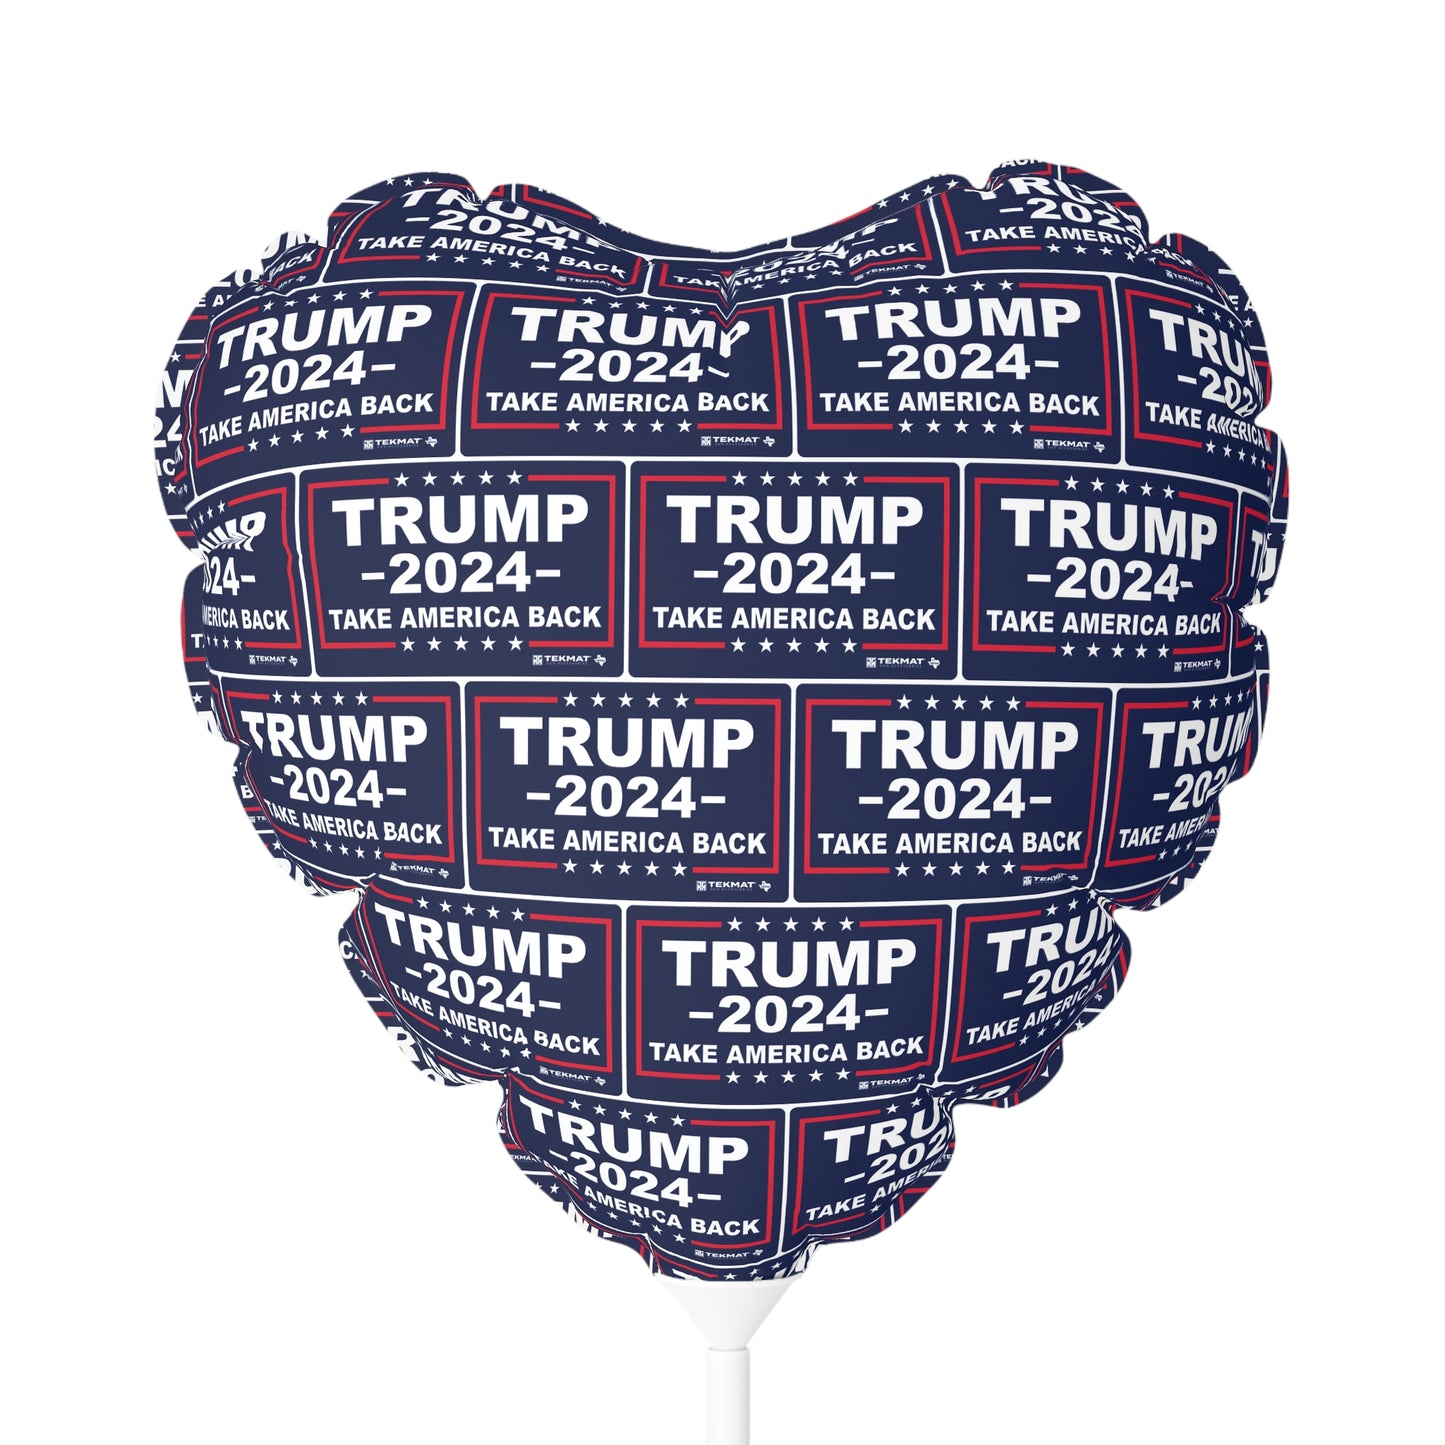 I love you like TRUMP loves AMERICA Balloon (Round and Heart-shaped), 11"